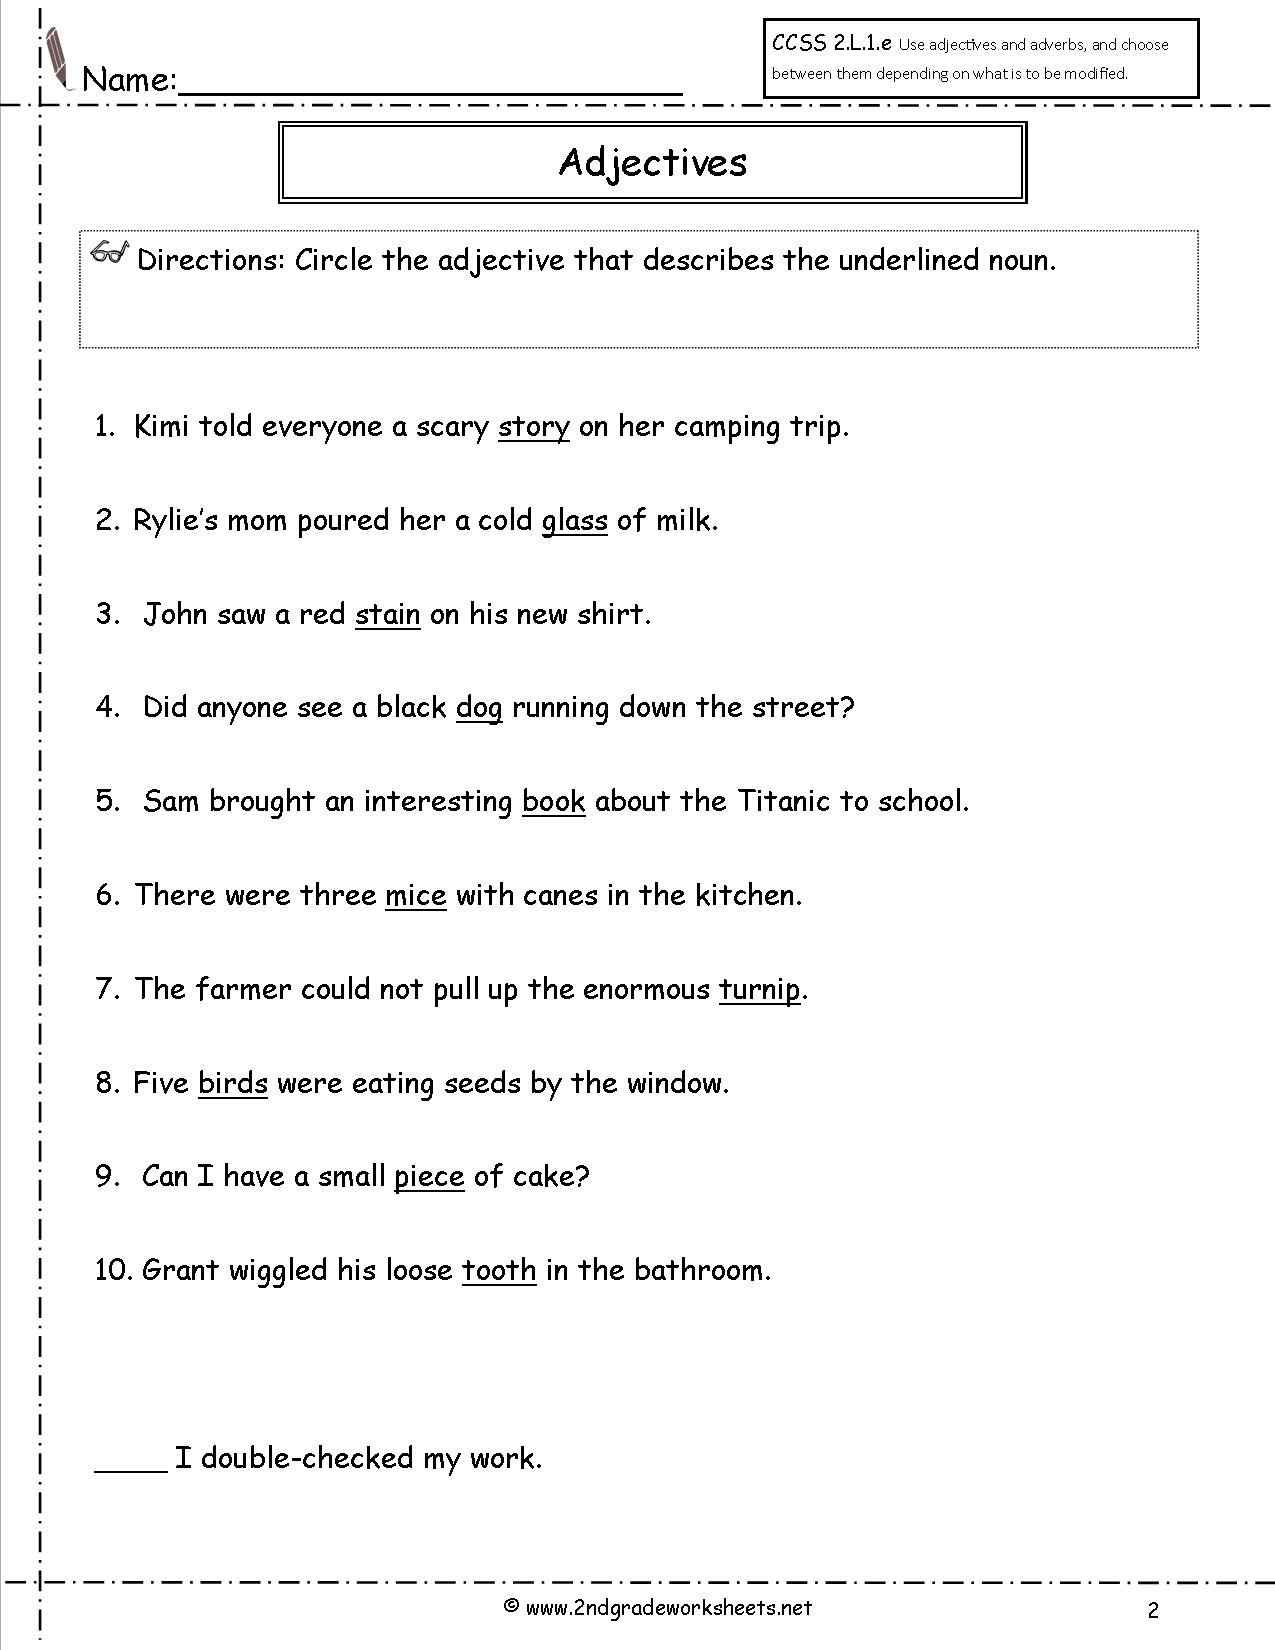 Adjectives And Adverbs Worksheet For 2nd Grade